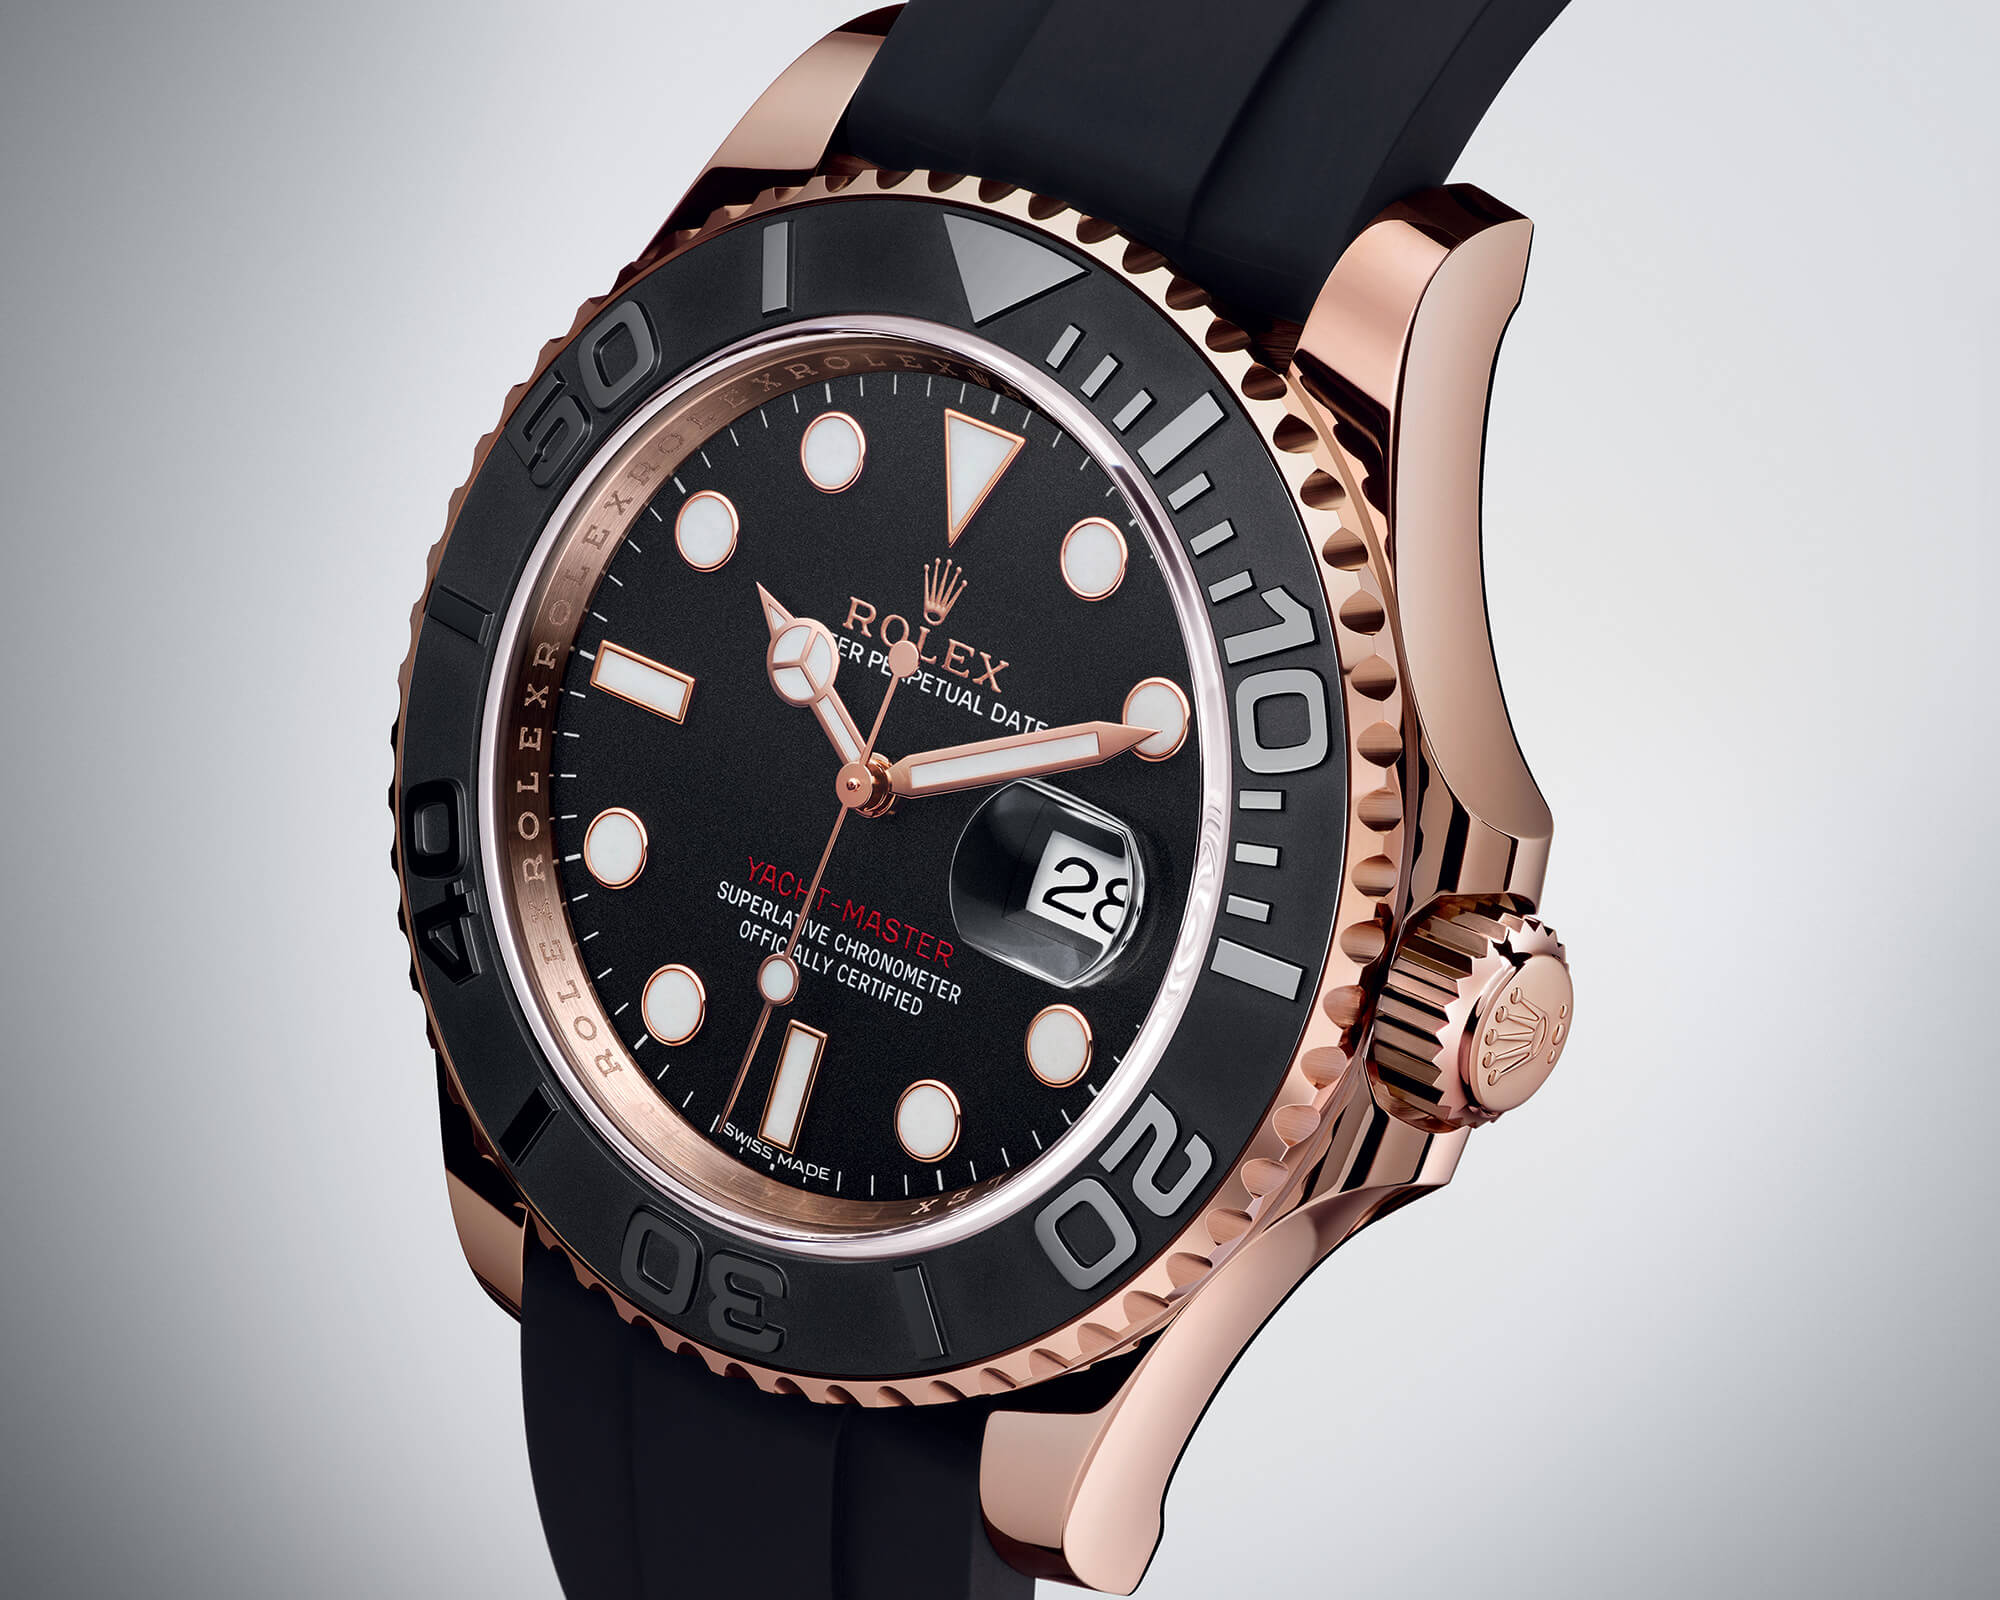 rolex oyster perpetual yacht